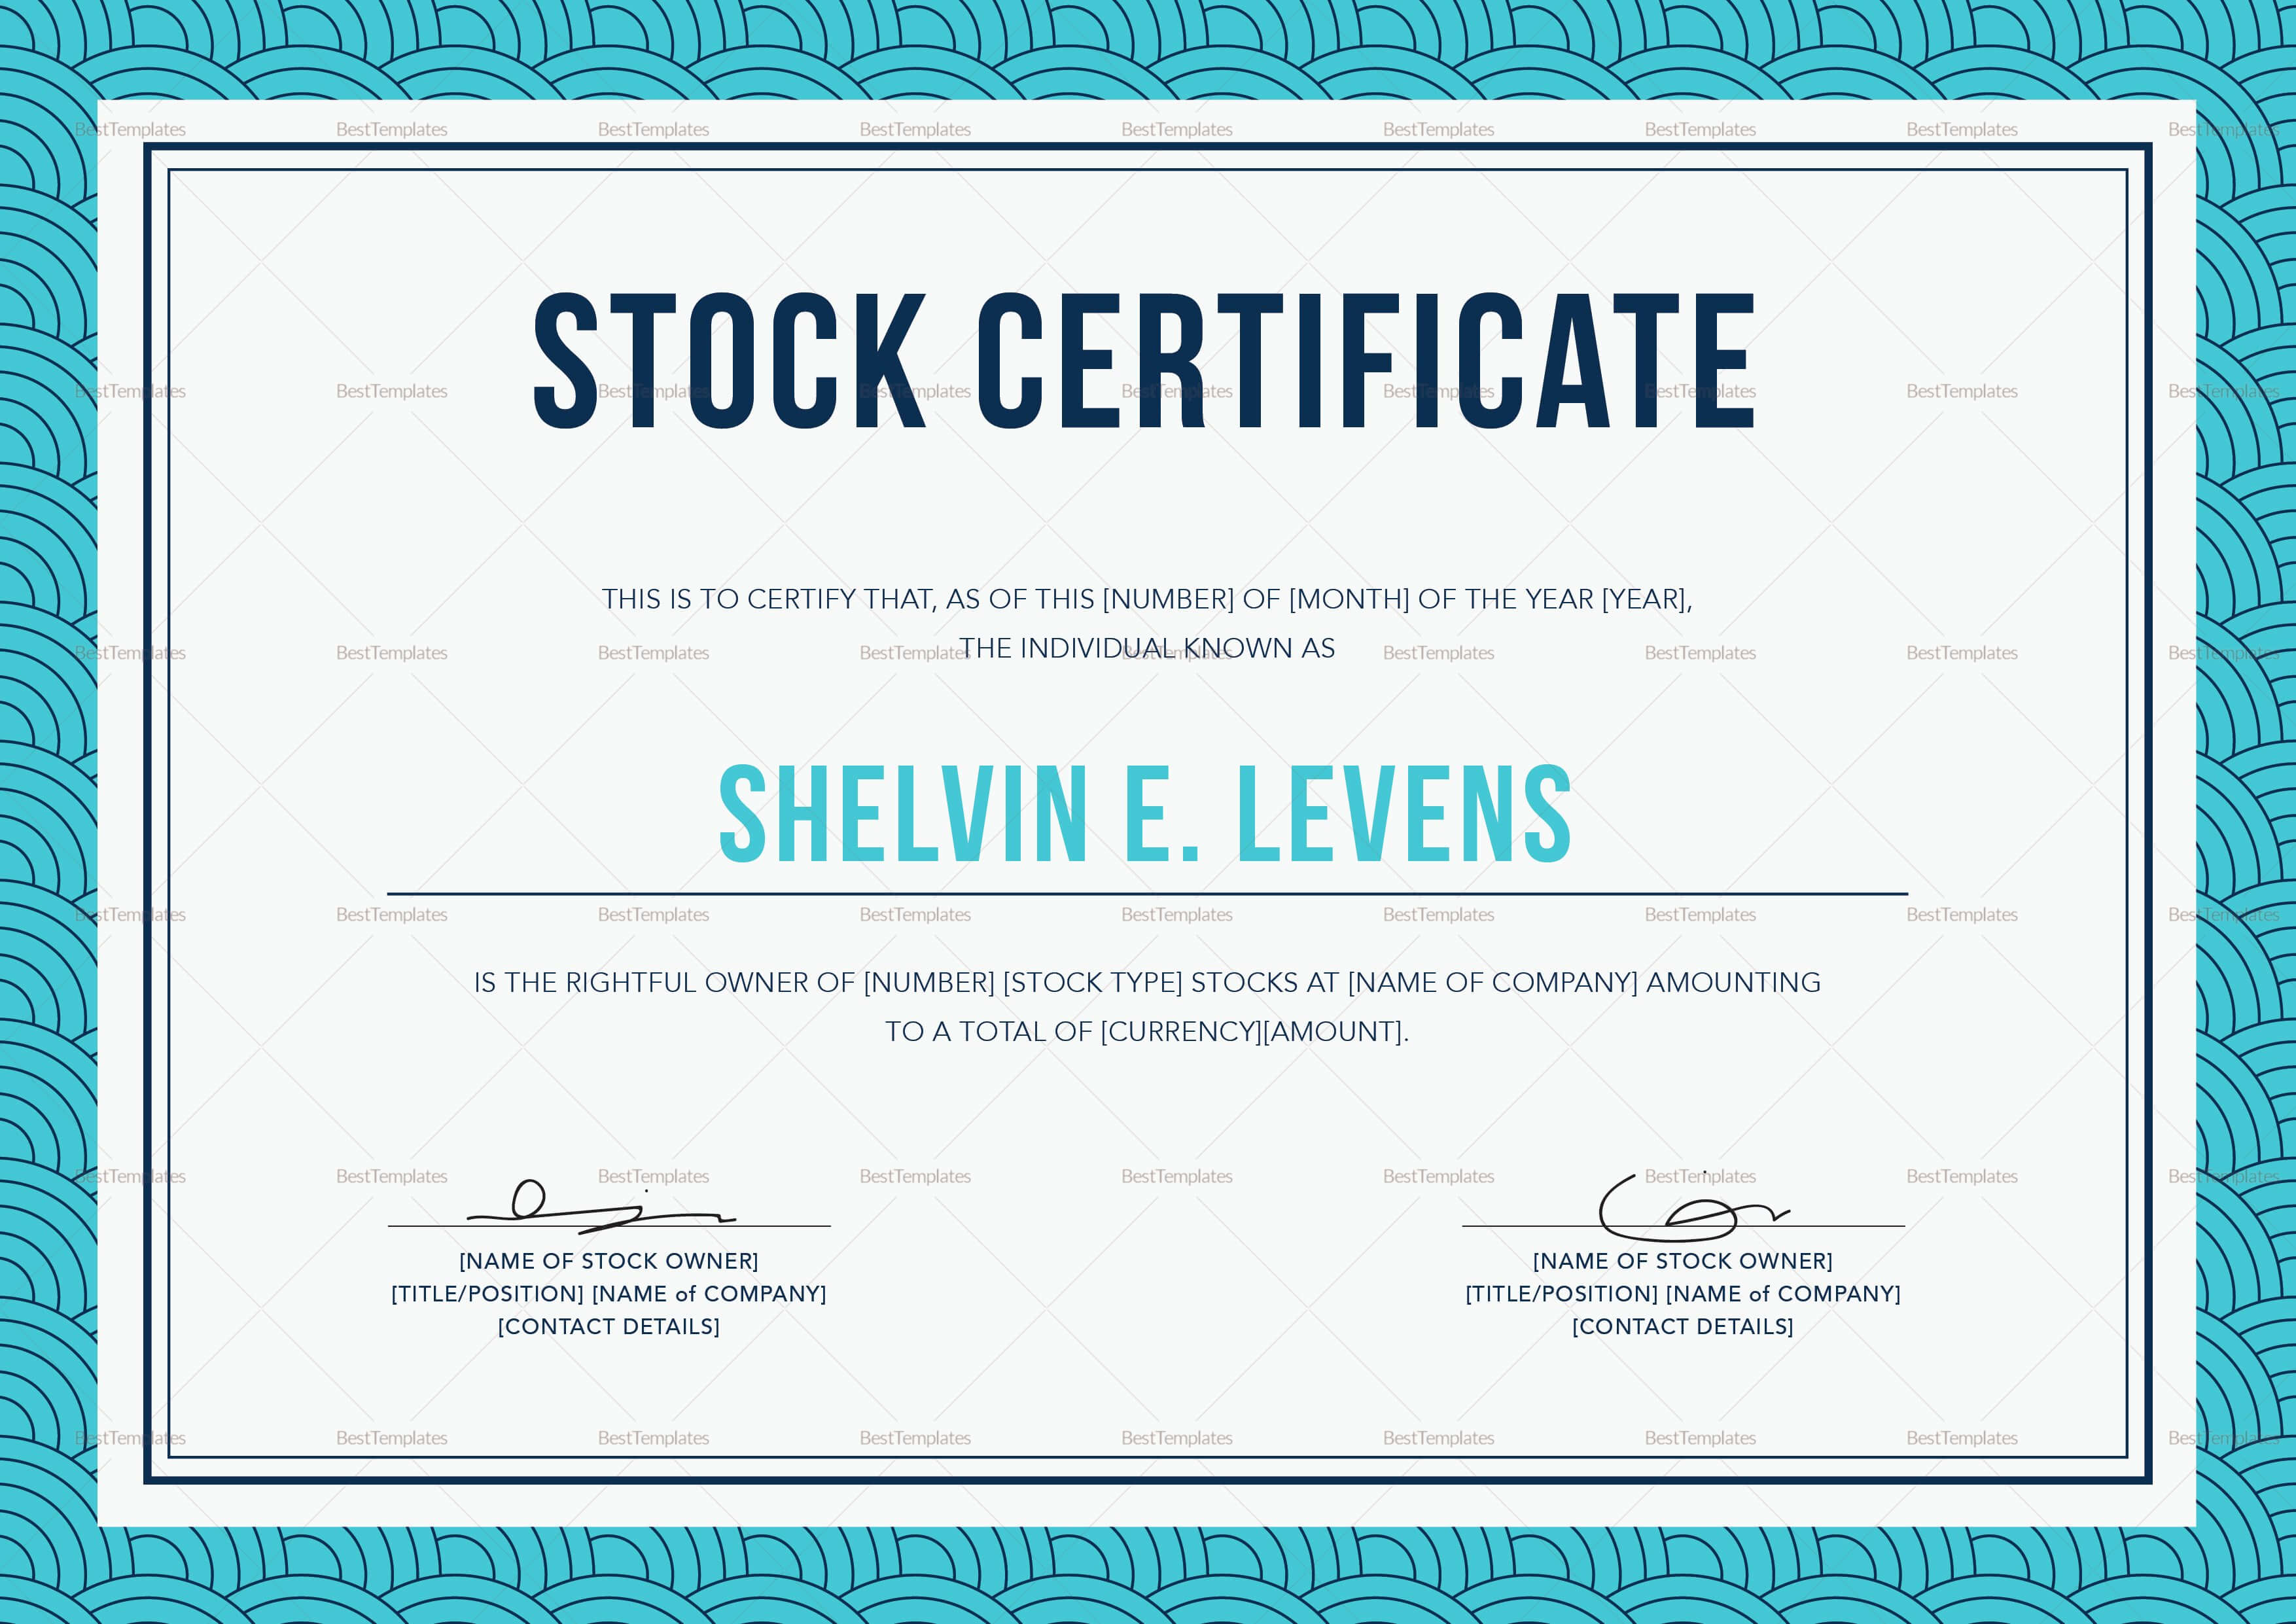 30 Stock Certificate Template Word | Pryncepality With Stock Certificate Template Word